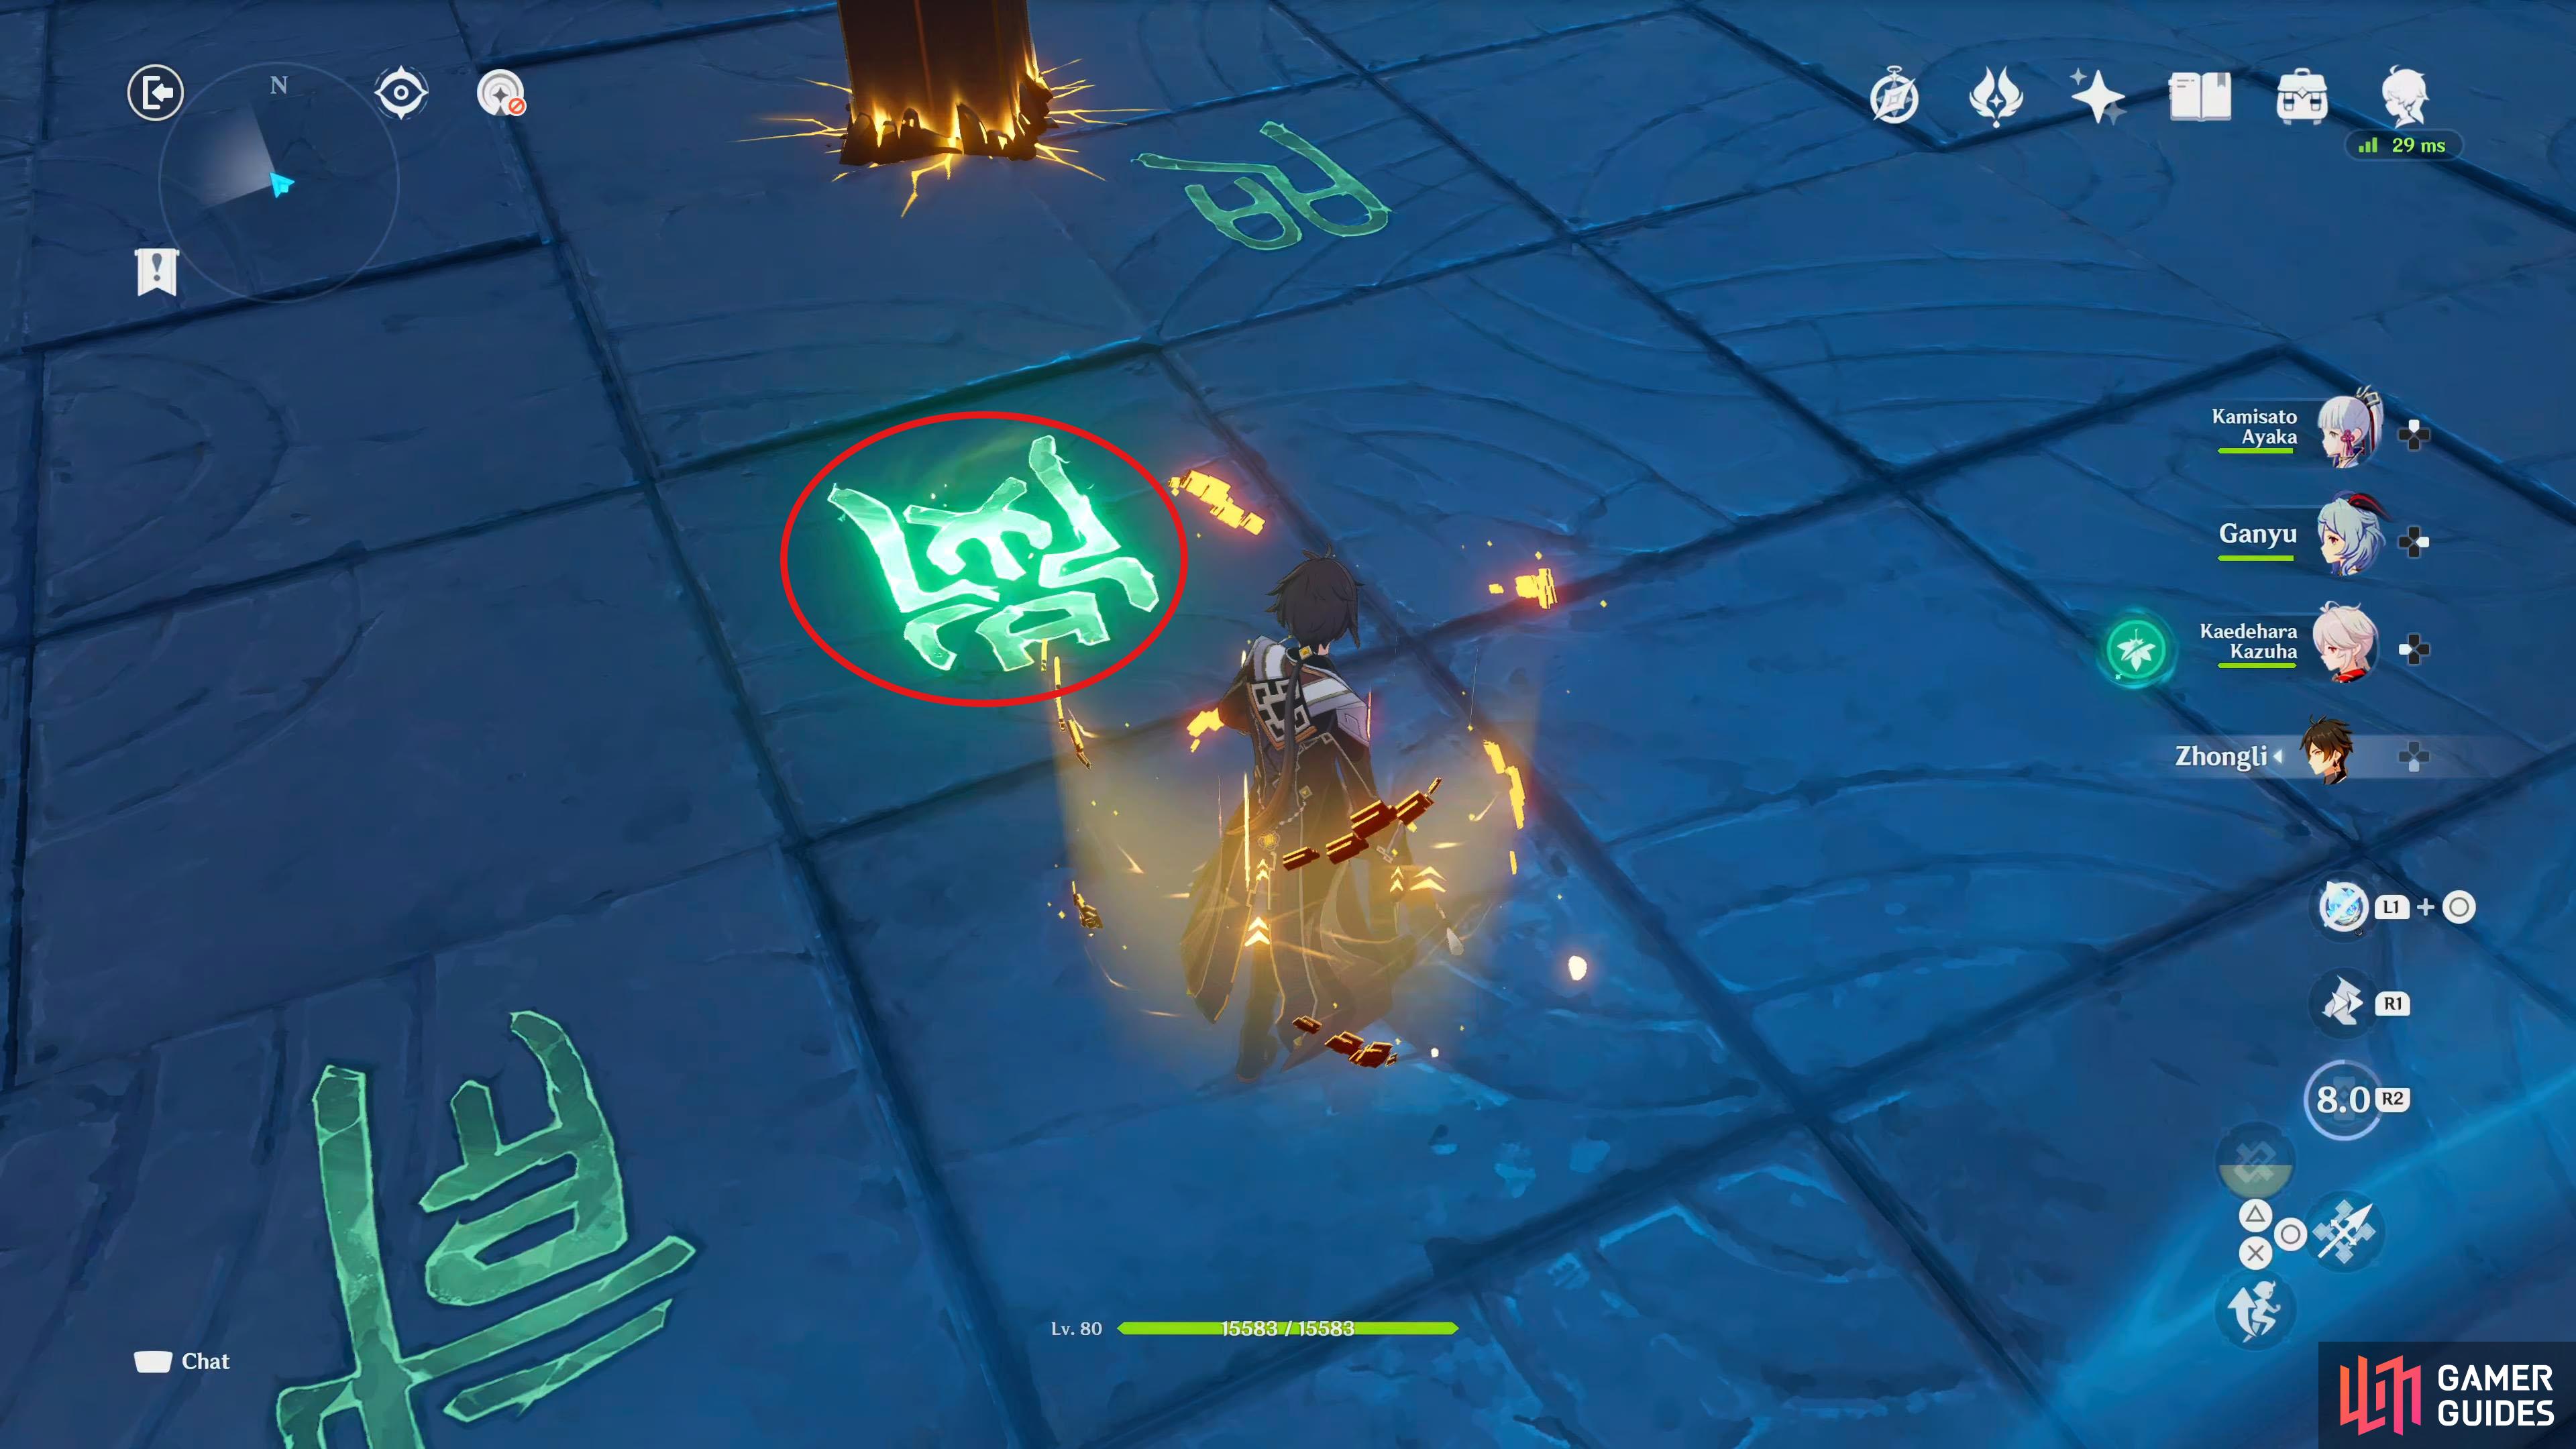 finally, activate the rune nearest to the center from the southwestern group